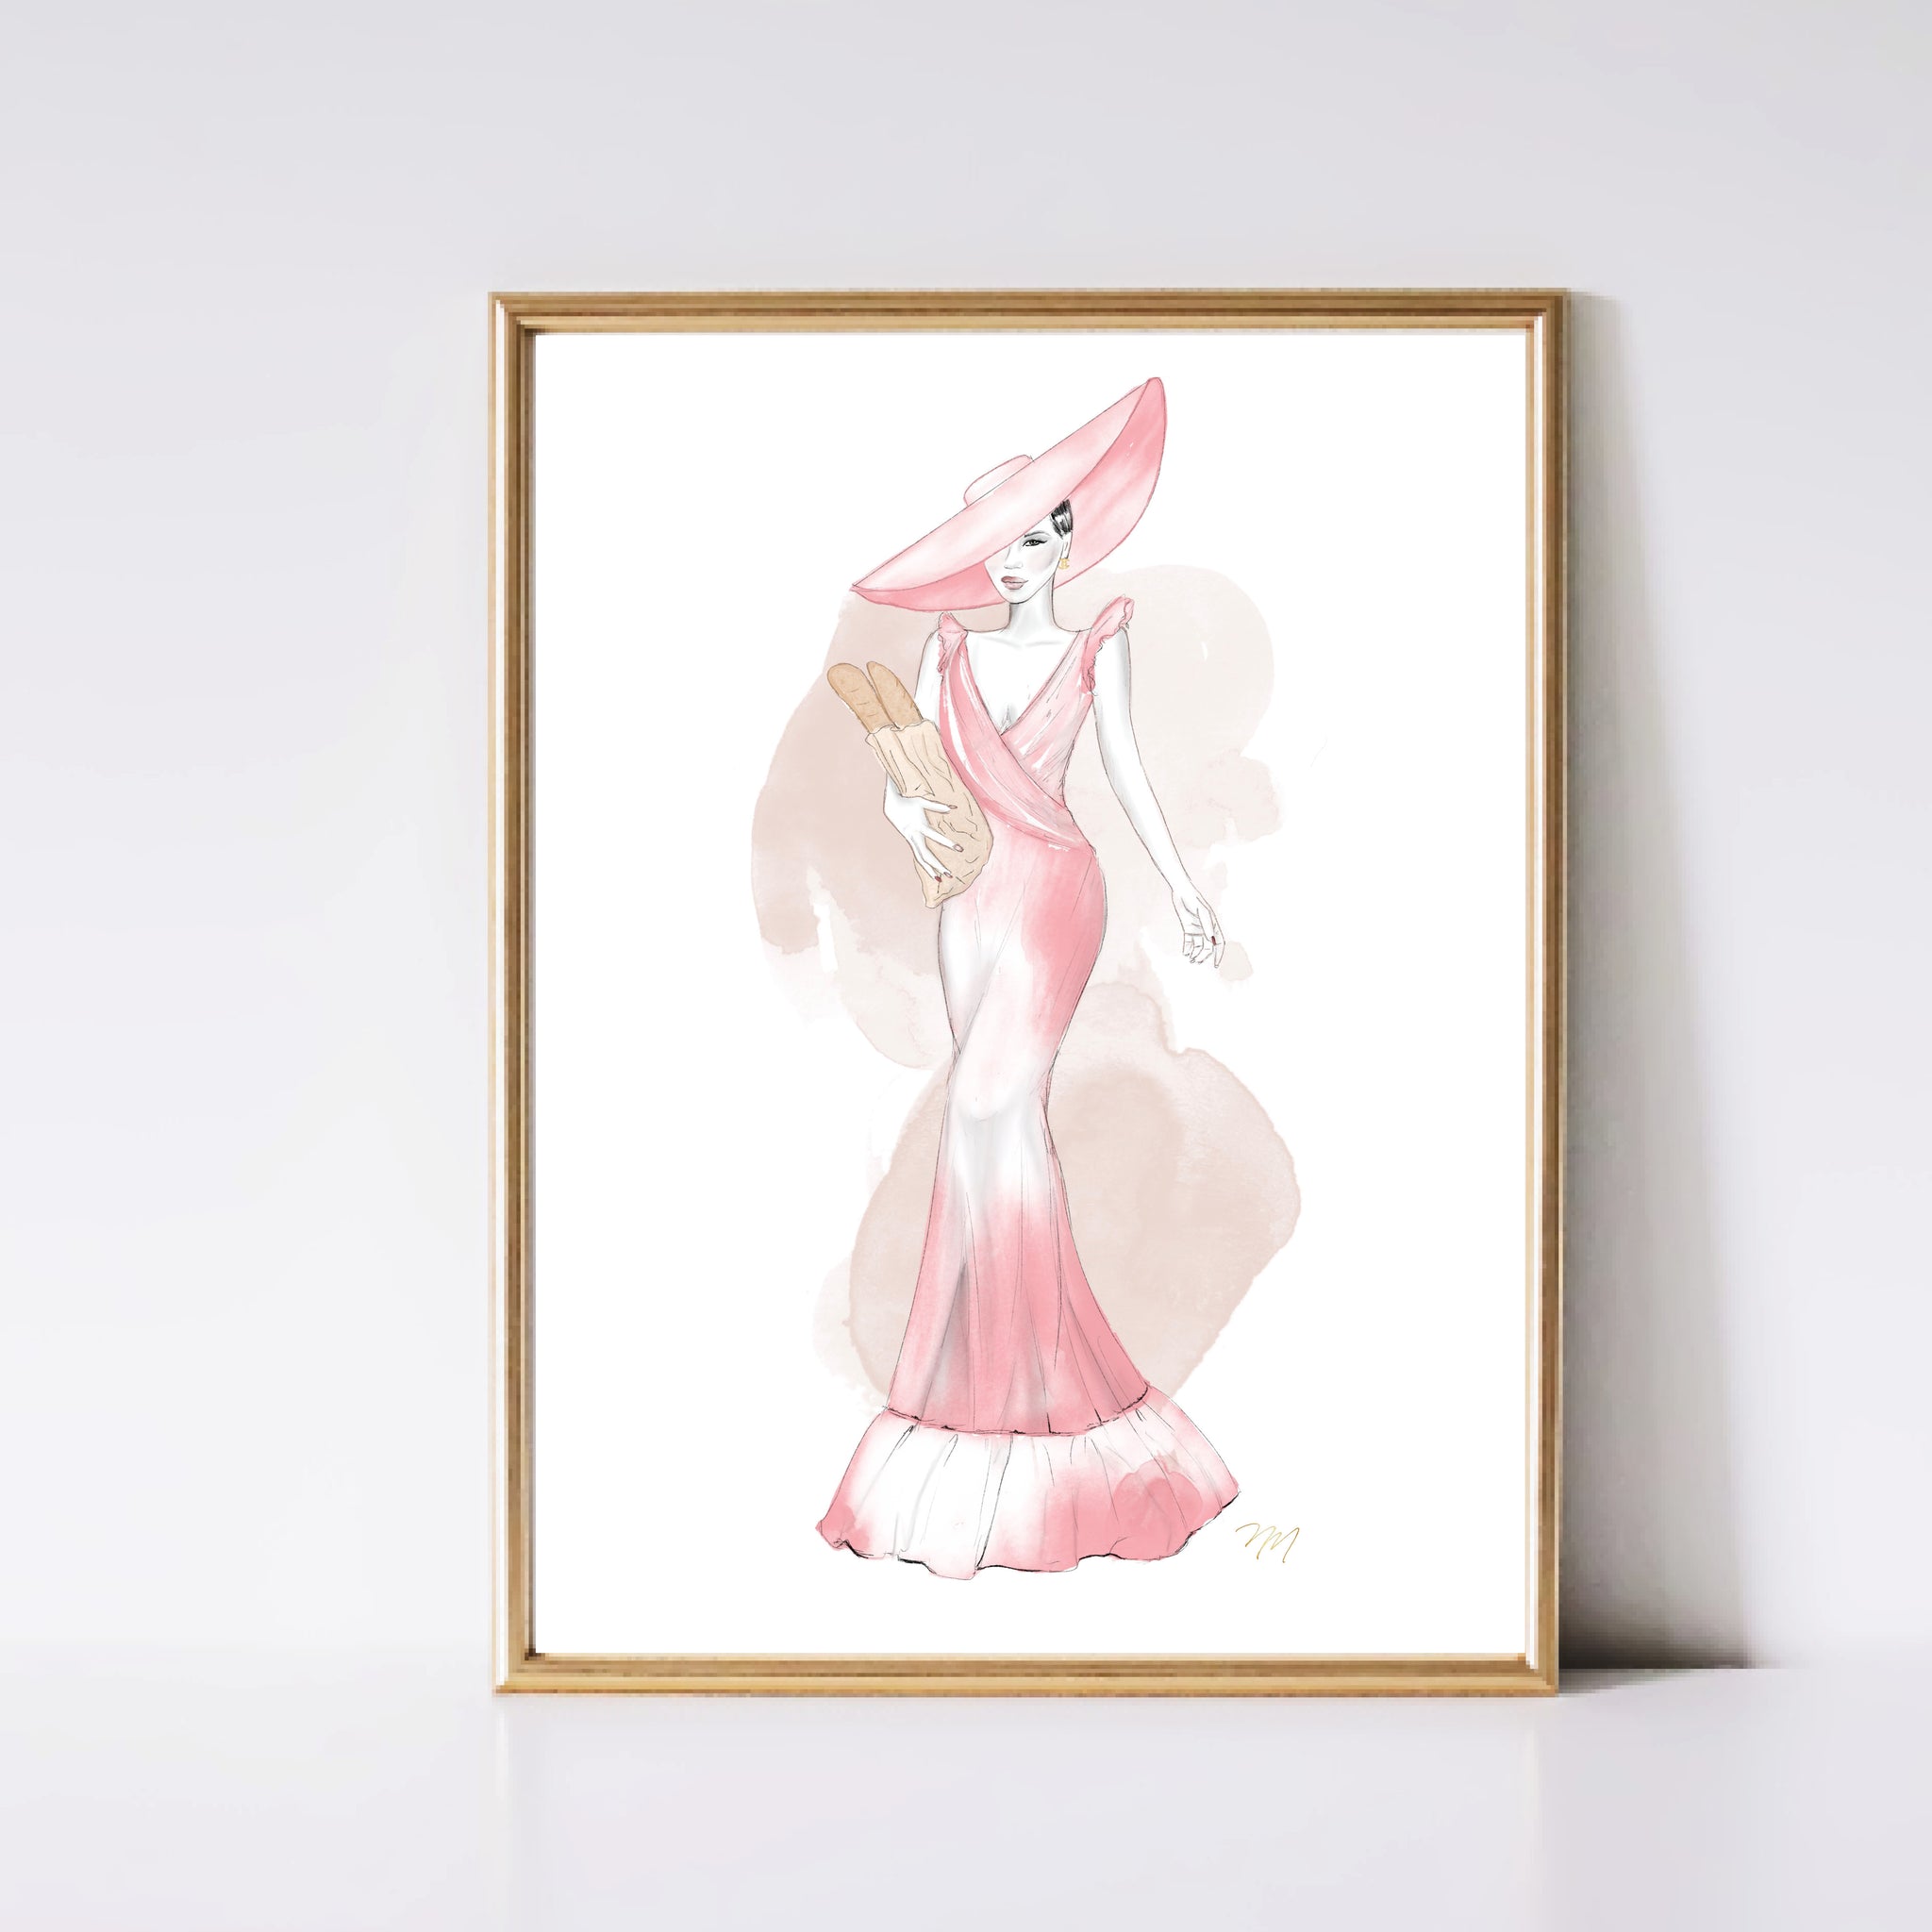 Lady in pink dress and large hat carrying baguettes. Art print of an original watercolor painting by Nina Maric. Monochrome version (no skin colour)